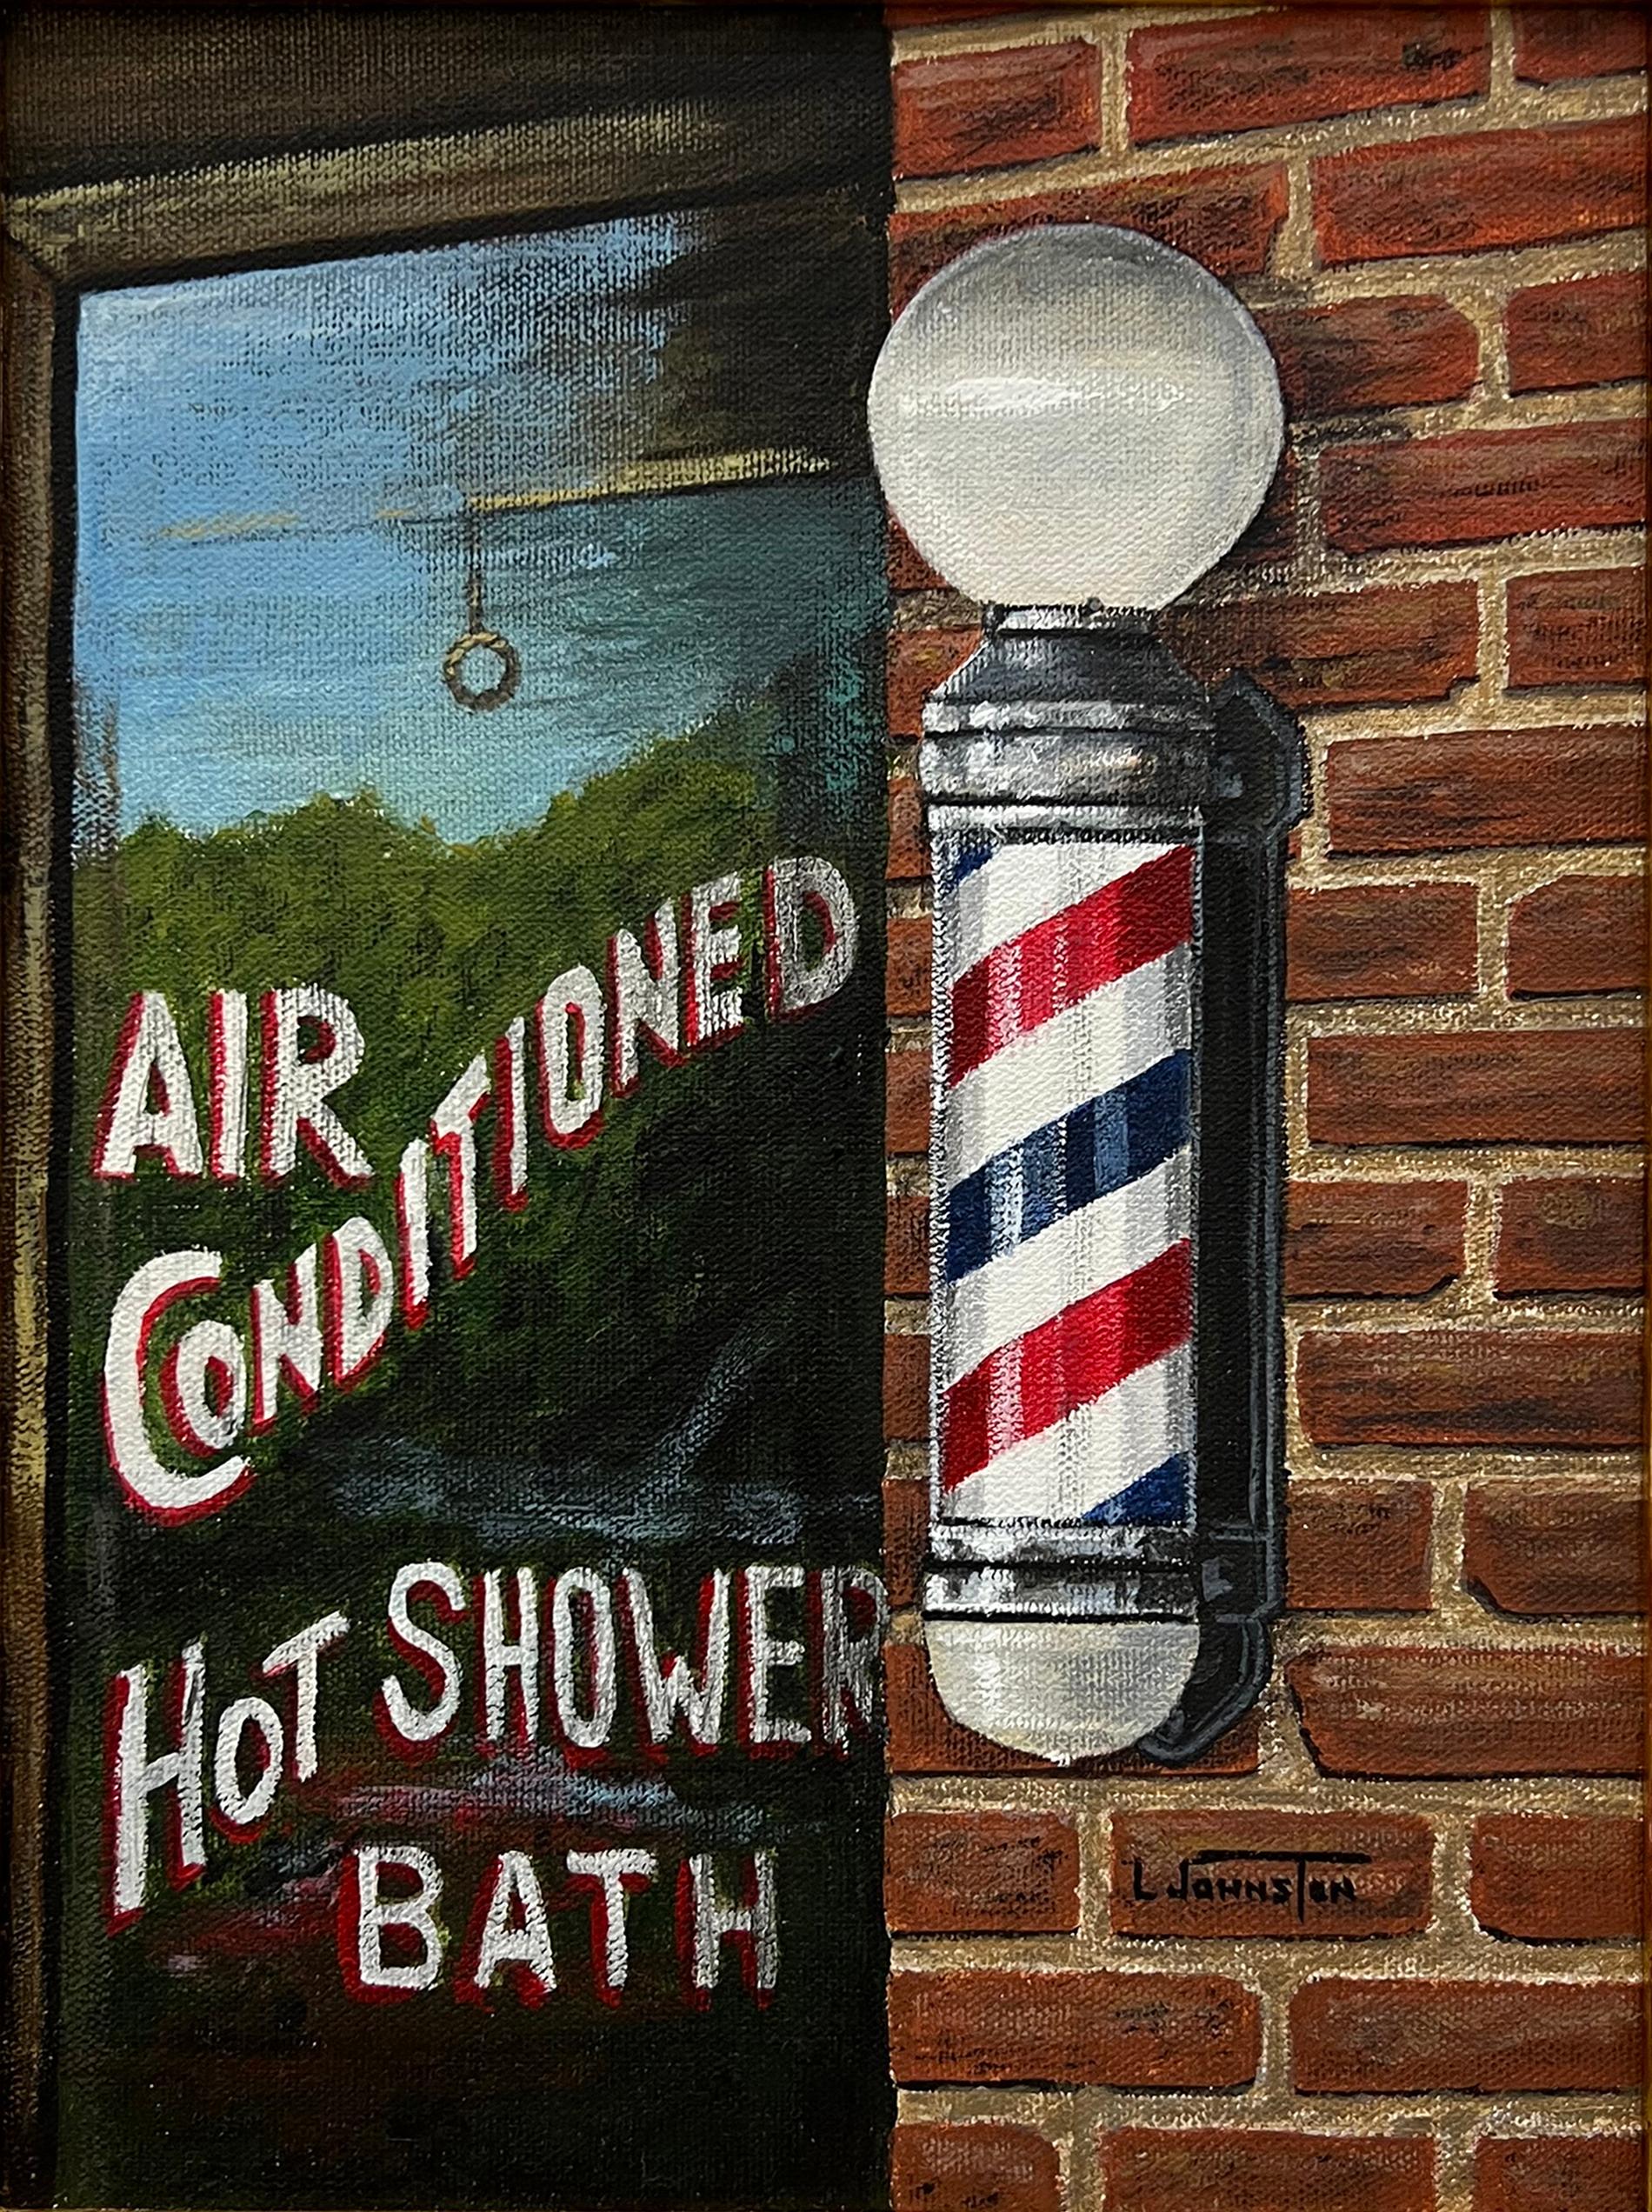 Vintage American Urban Realism Painting by L Johnston

Offered for sale is a Vintage American Urban Realism Painting by L Johnston. The storefront barbershop-themed work is signed by the artist in the lower right corner. The painting is presented